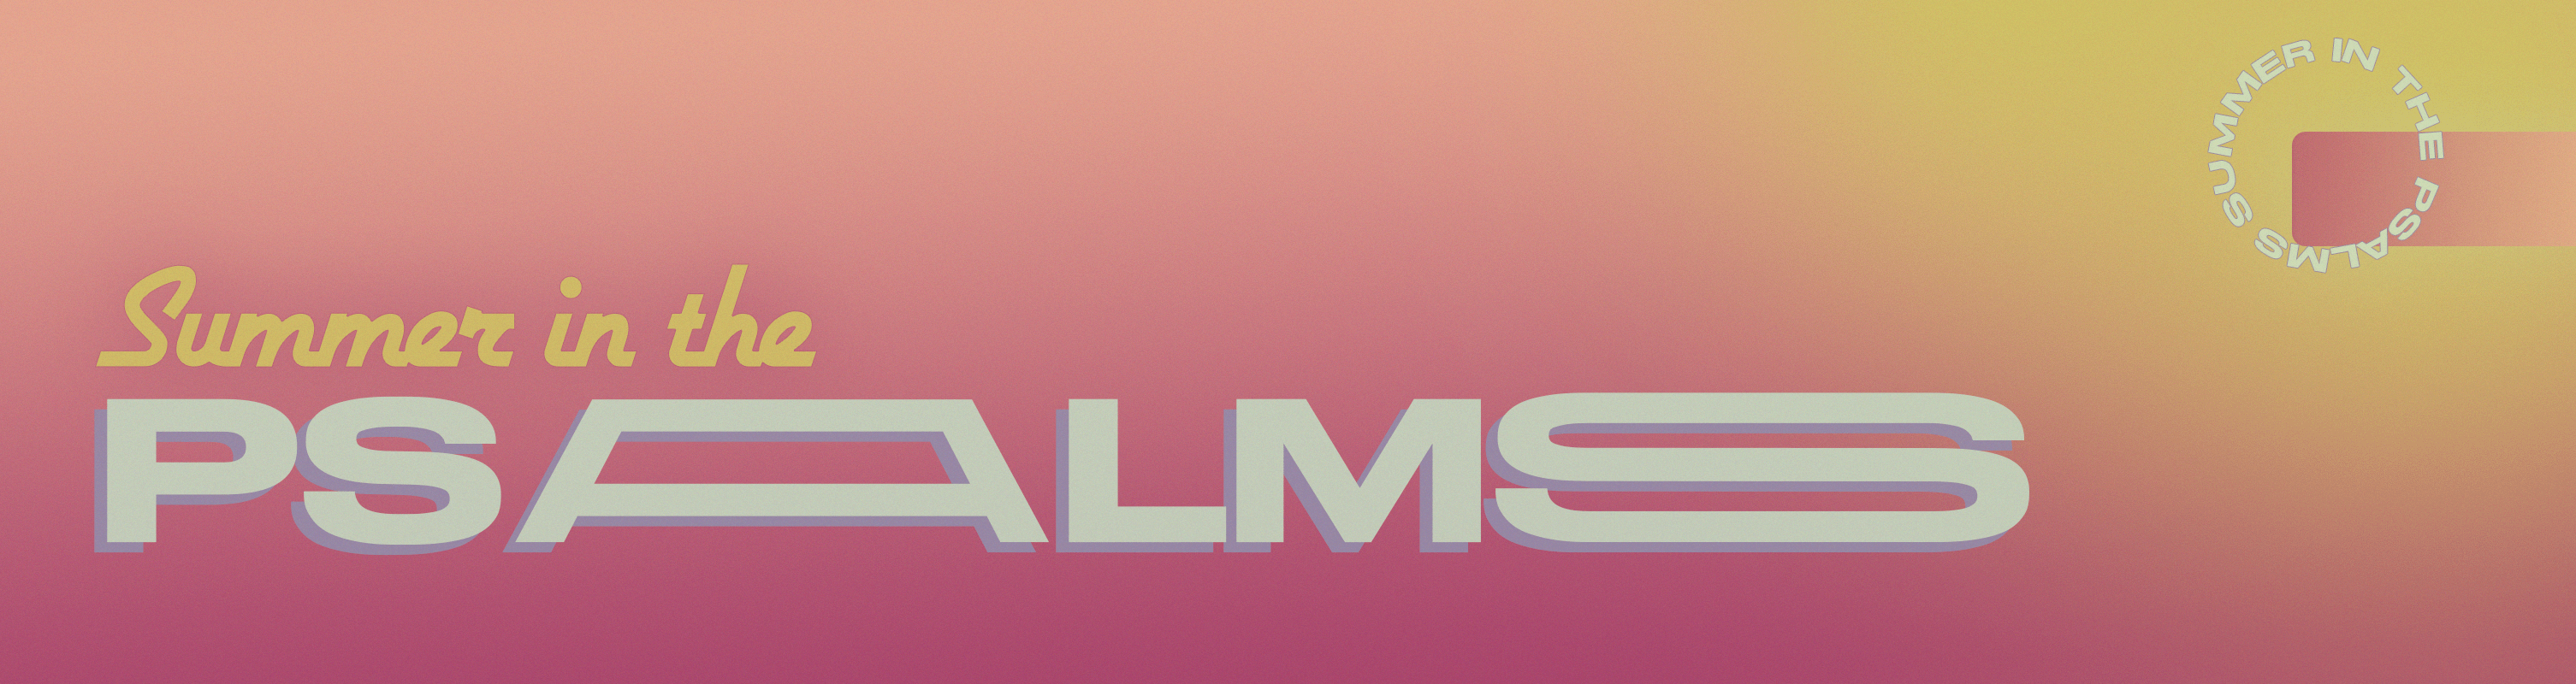 Summer-in-the-Psalms-WEBSITE